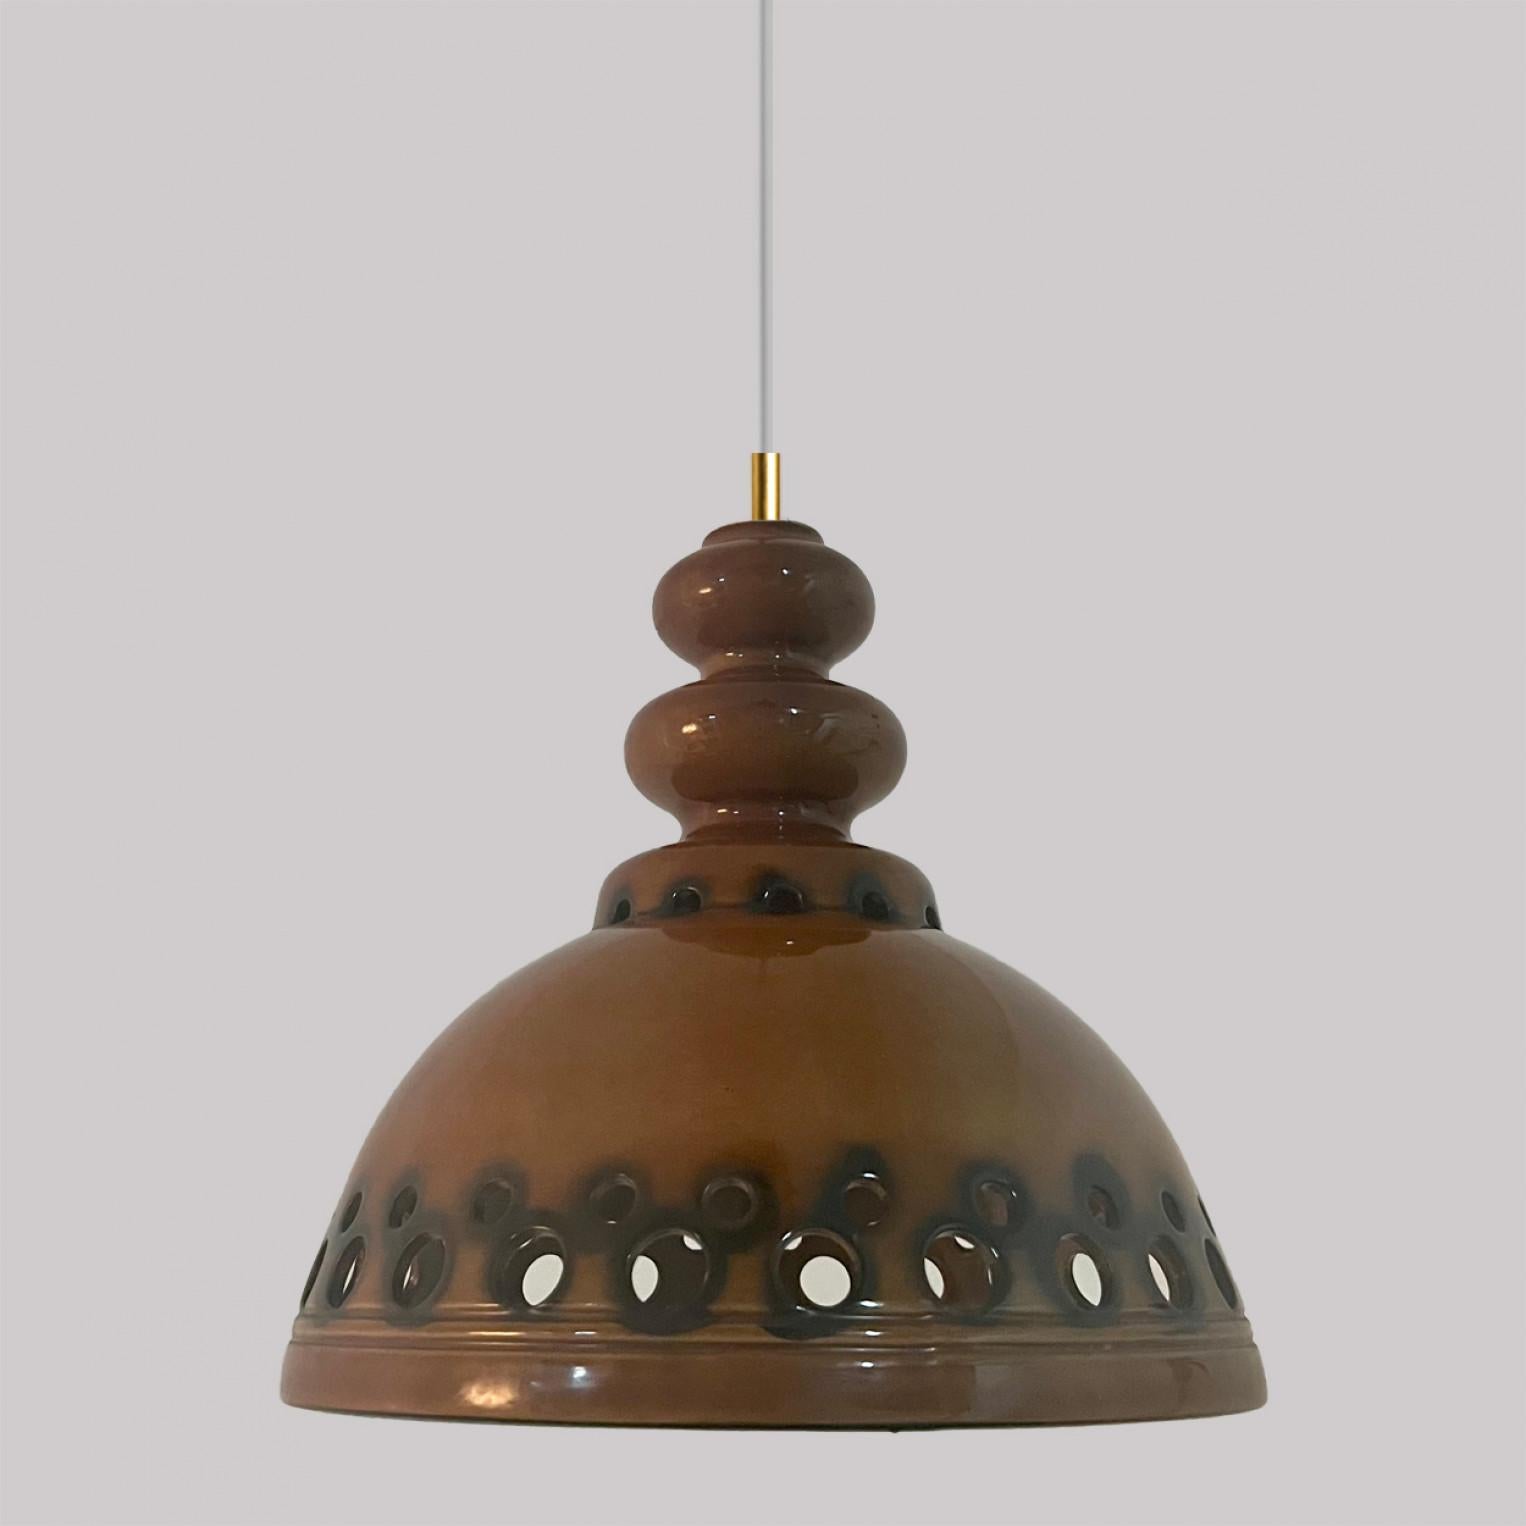 Set of Mixed Brown Glazed Ceramic Pendant Lights, Germany, 1970s For Sale 6